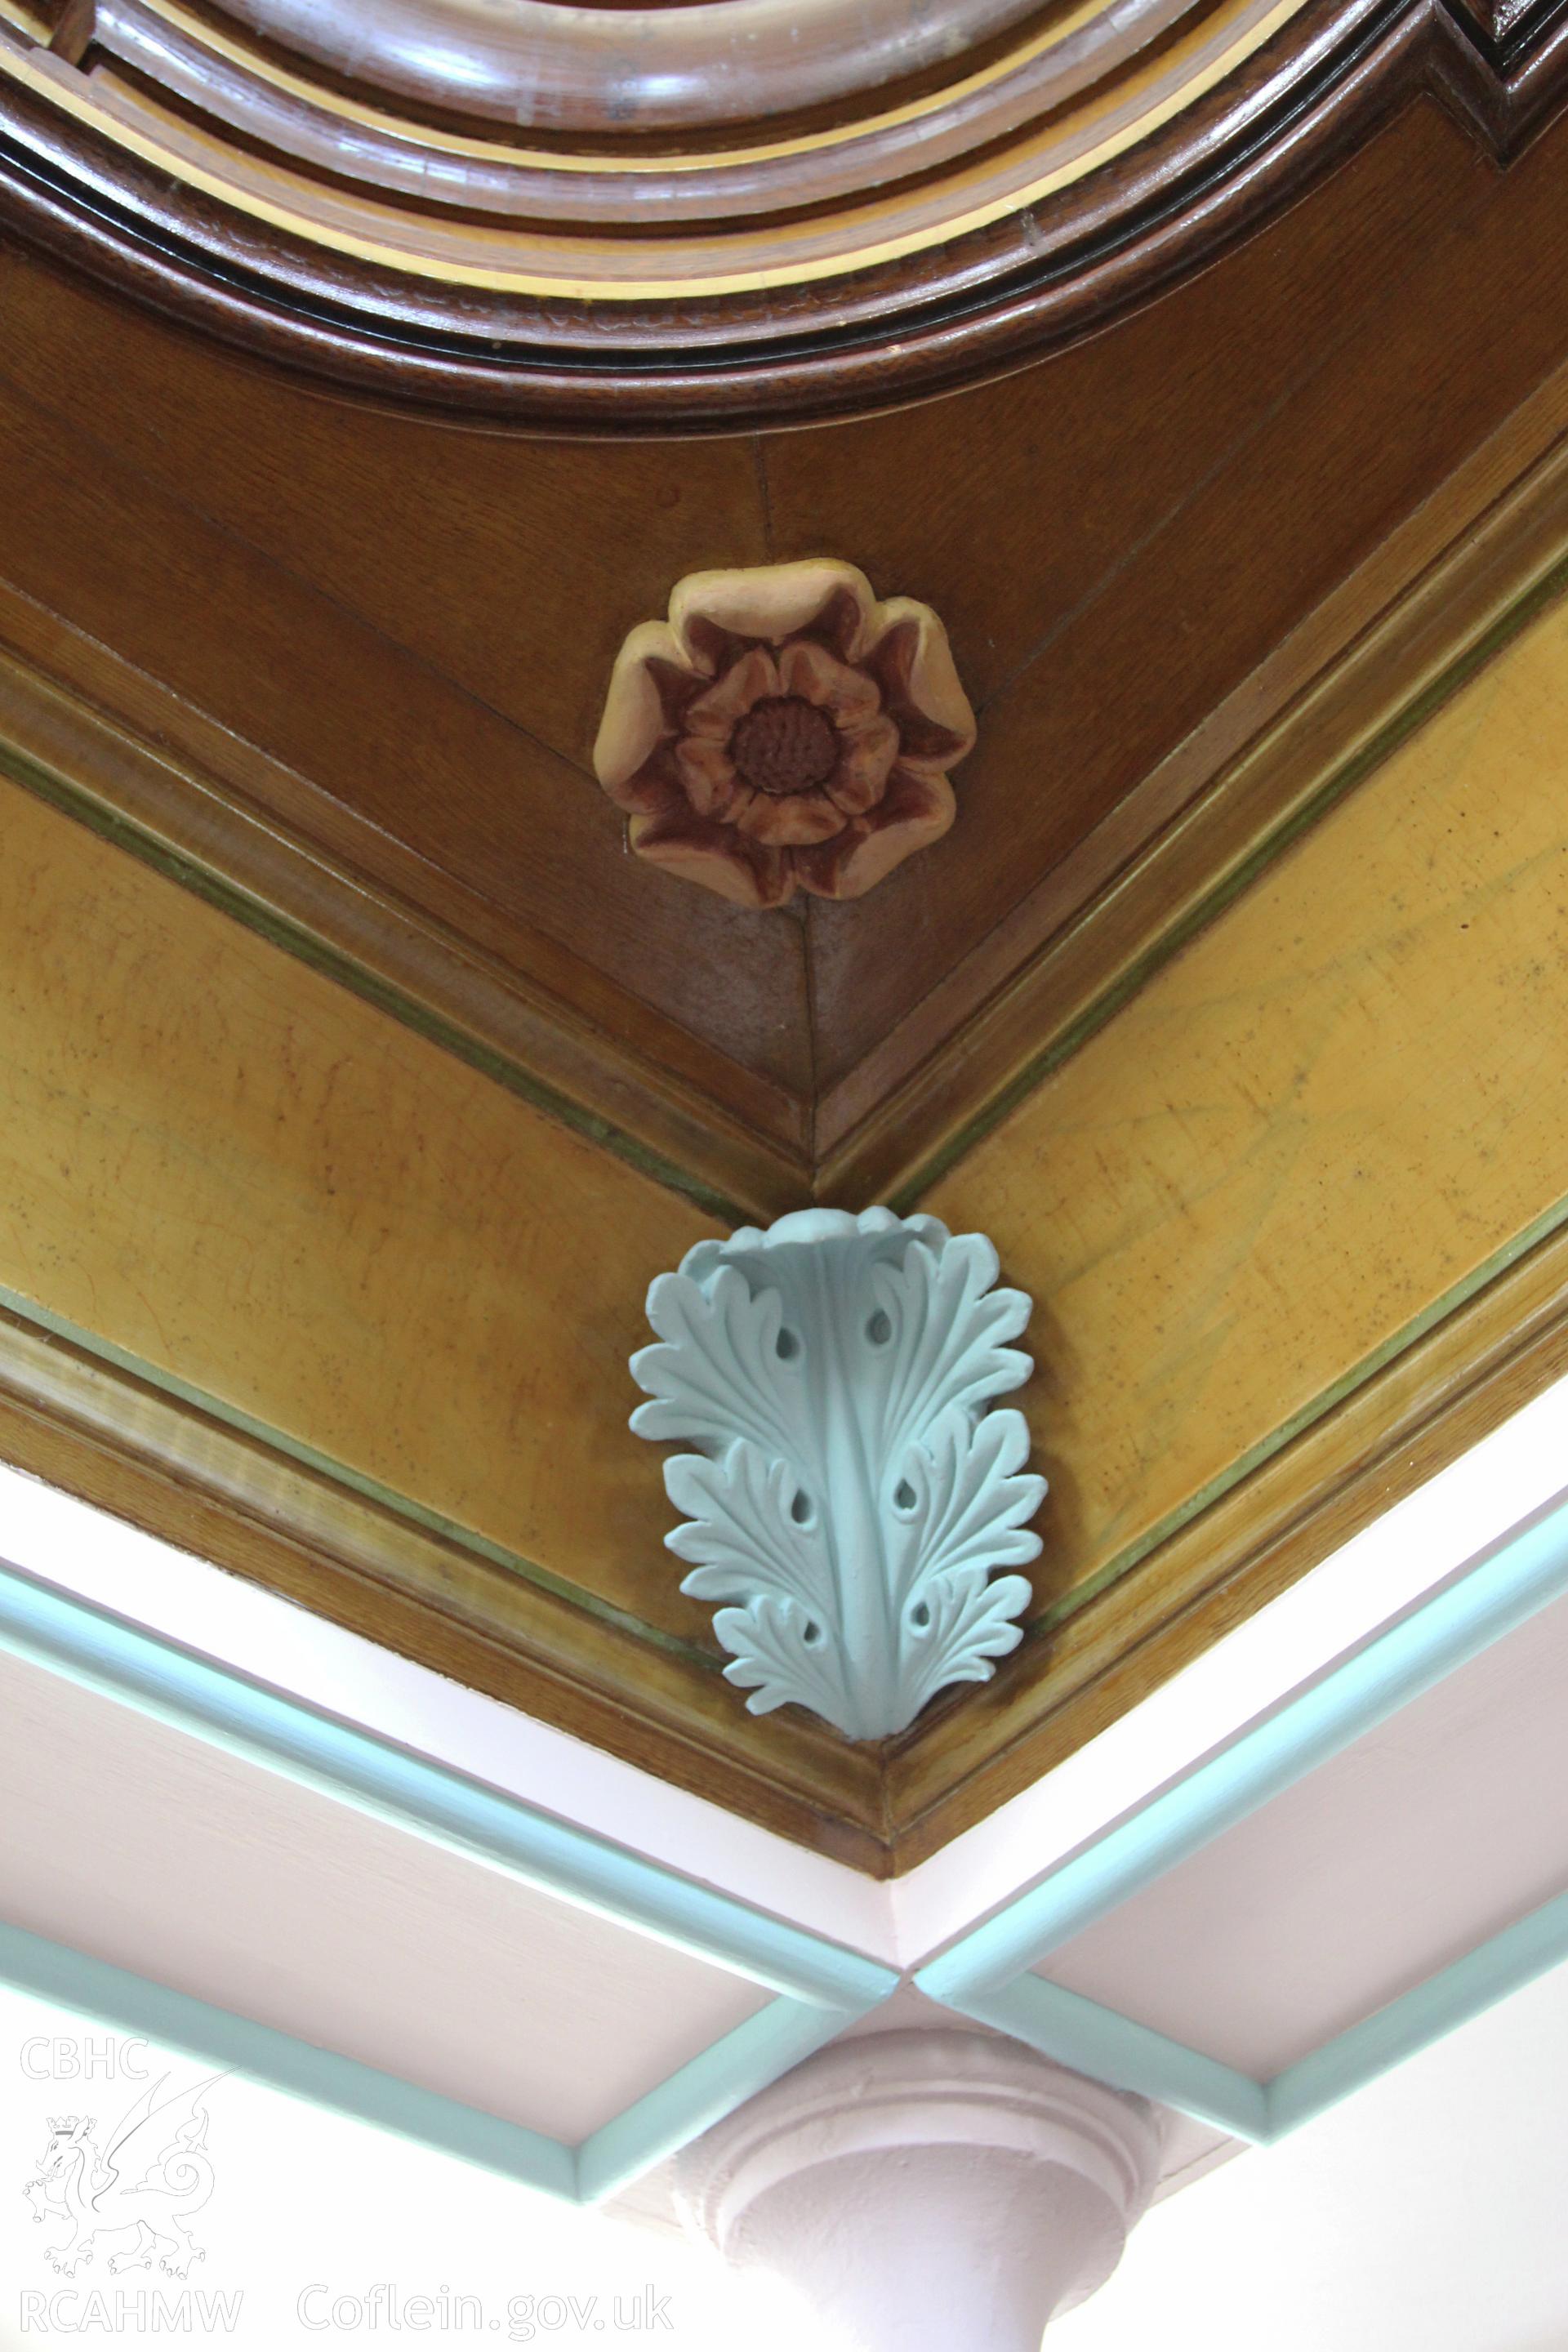 Detail of plaster acanthus leaf and carved timber detail on gallery front